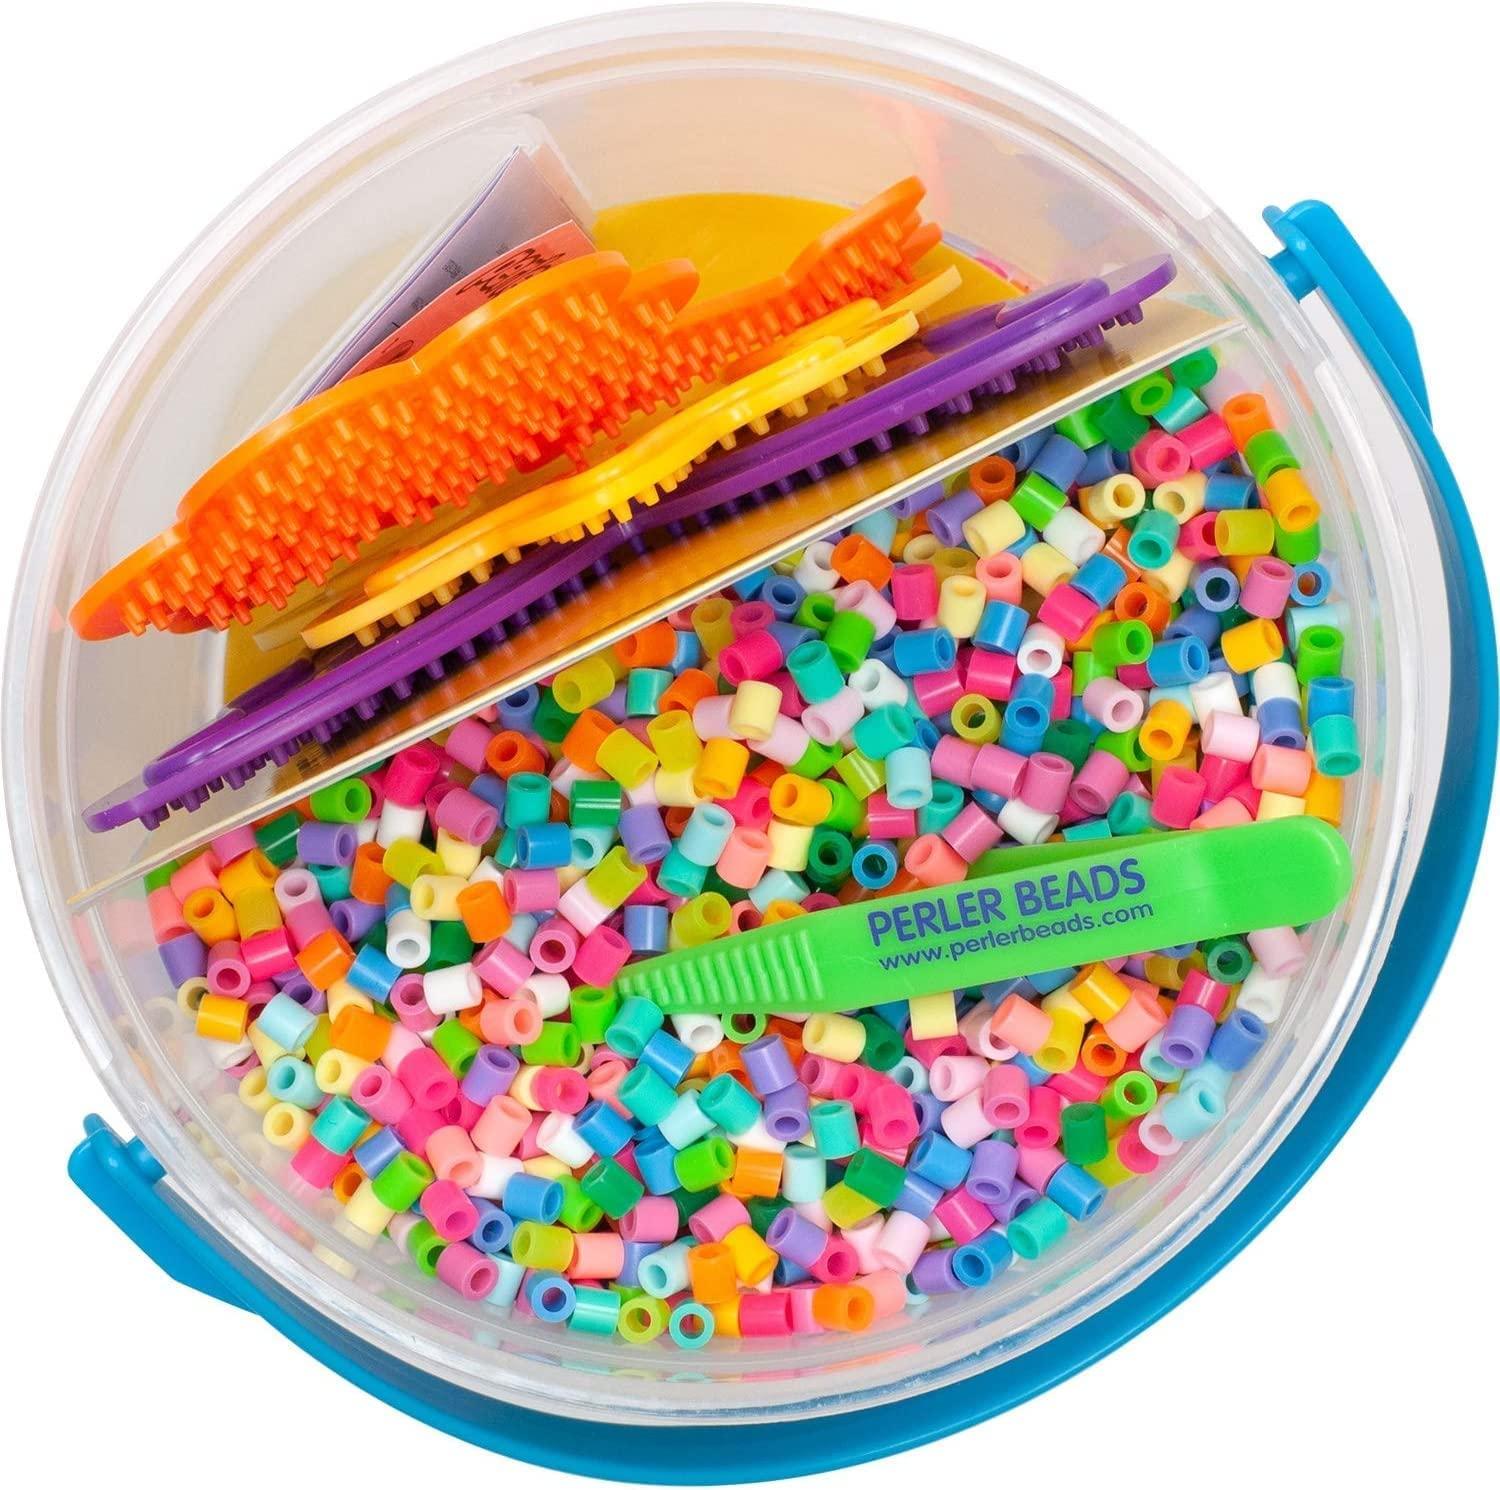 6000 Fuse Beads with Tweezers, Peg Boards, Ironing Paper, bucket